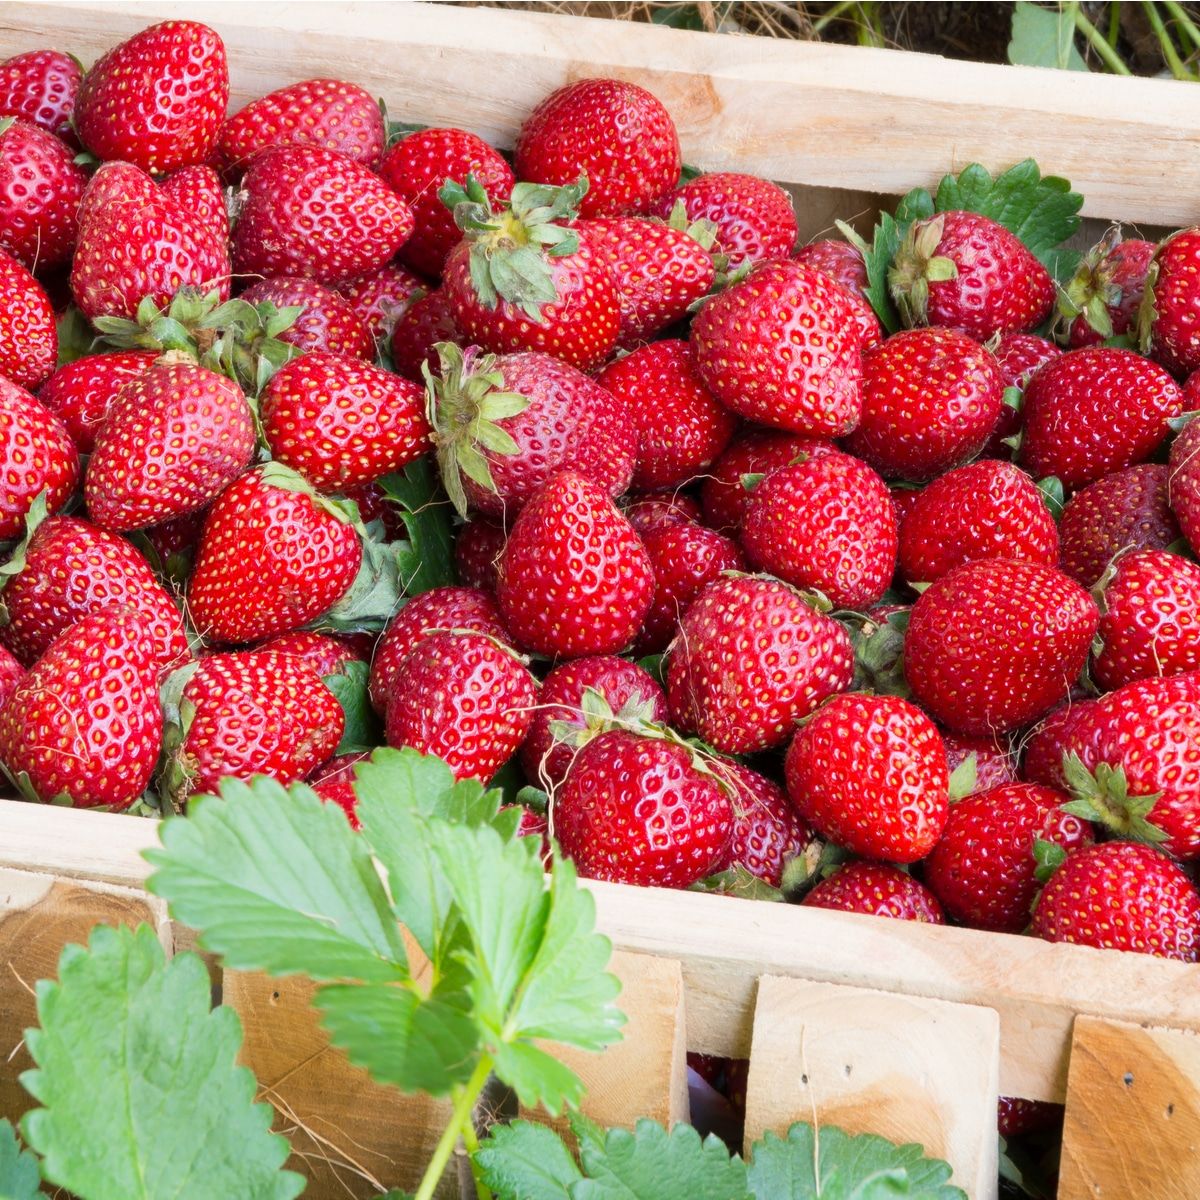 Ripe fresh strawberries in wooden crate